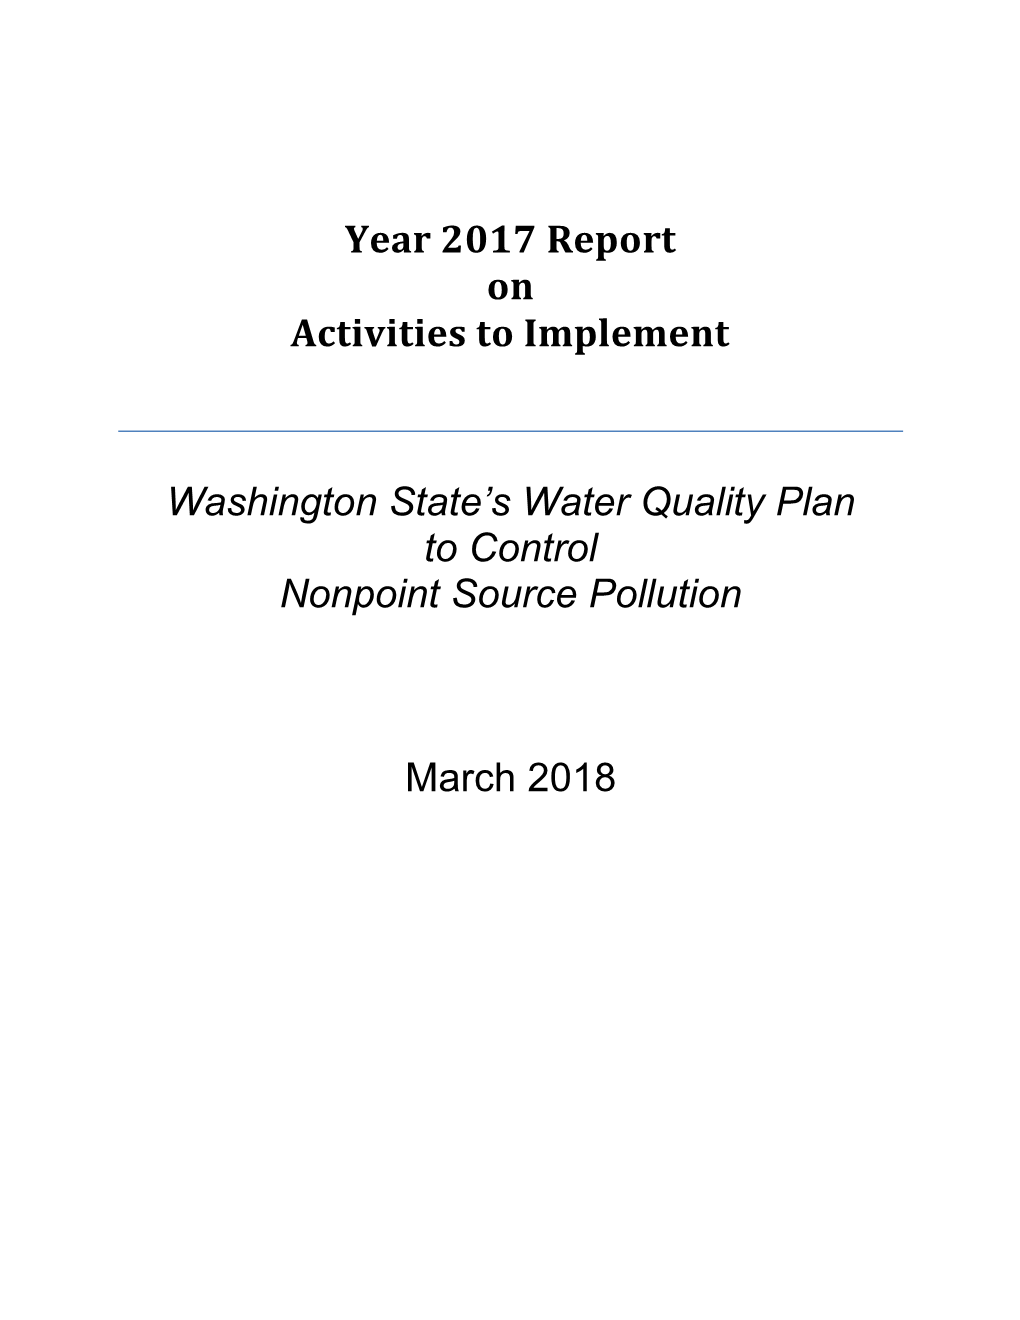 Washington State's Water Quality Plan to Control Nonpoint Source Pollution